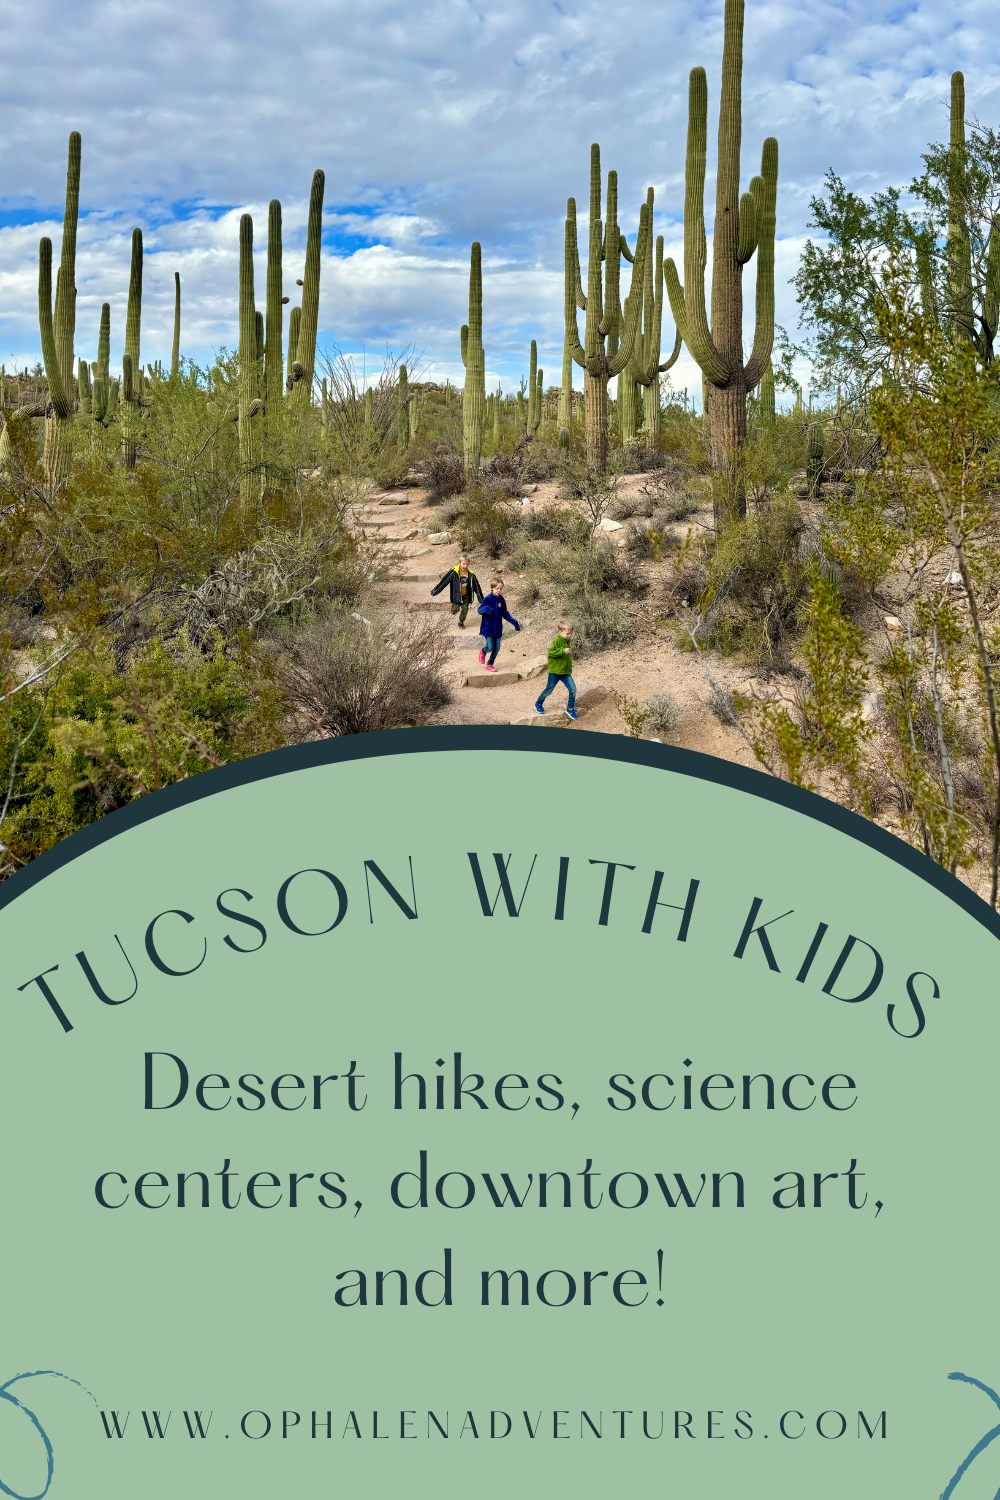 Things to do in Tucson with kids, children hiking with Saguaro cacti | O'Phalen Adventures